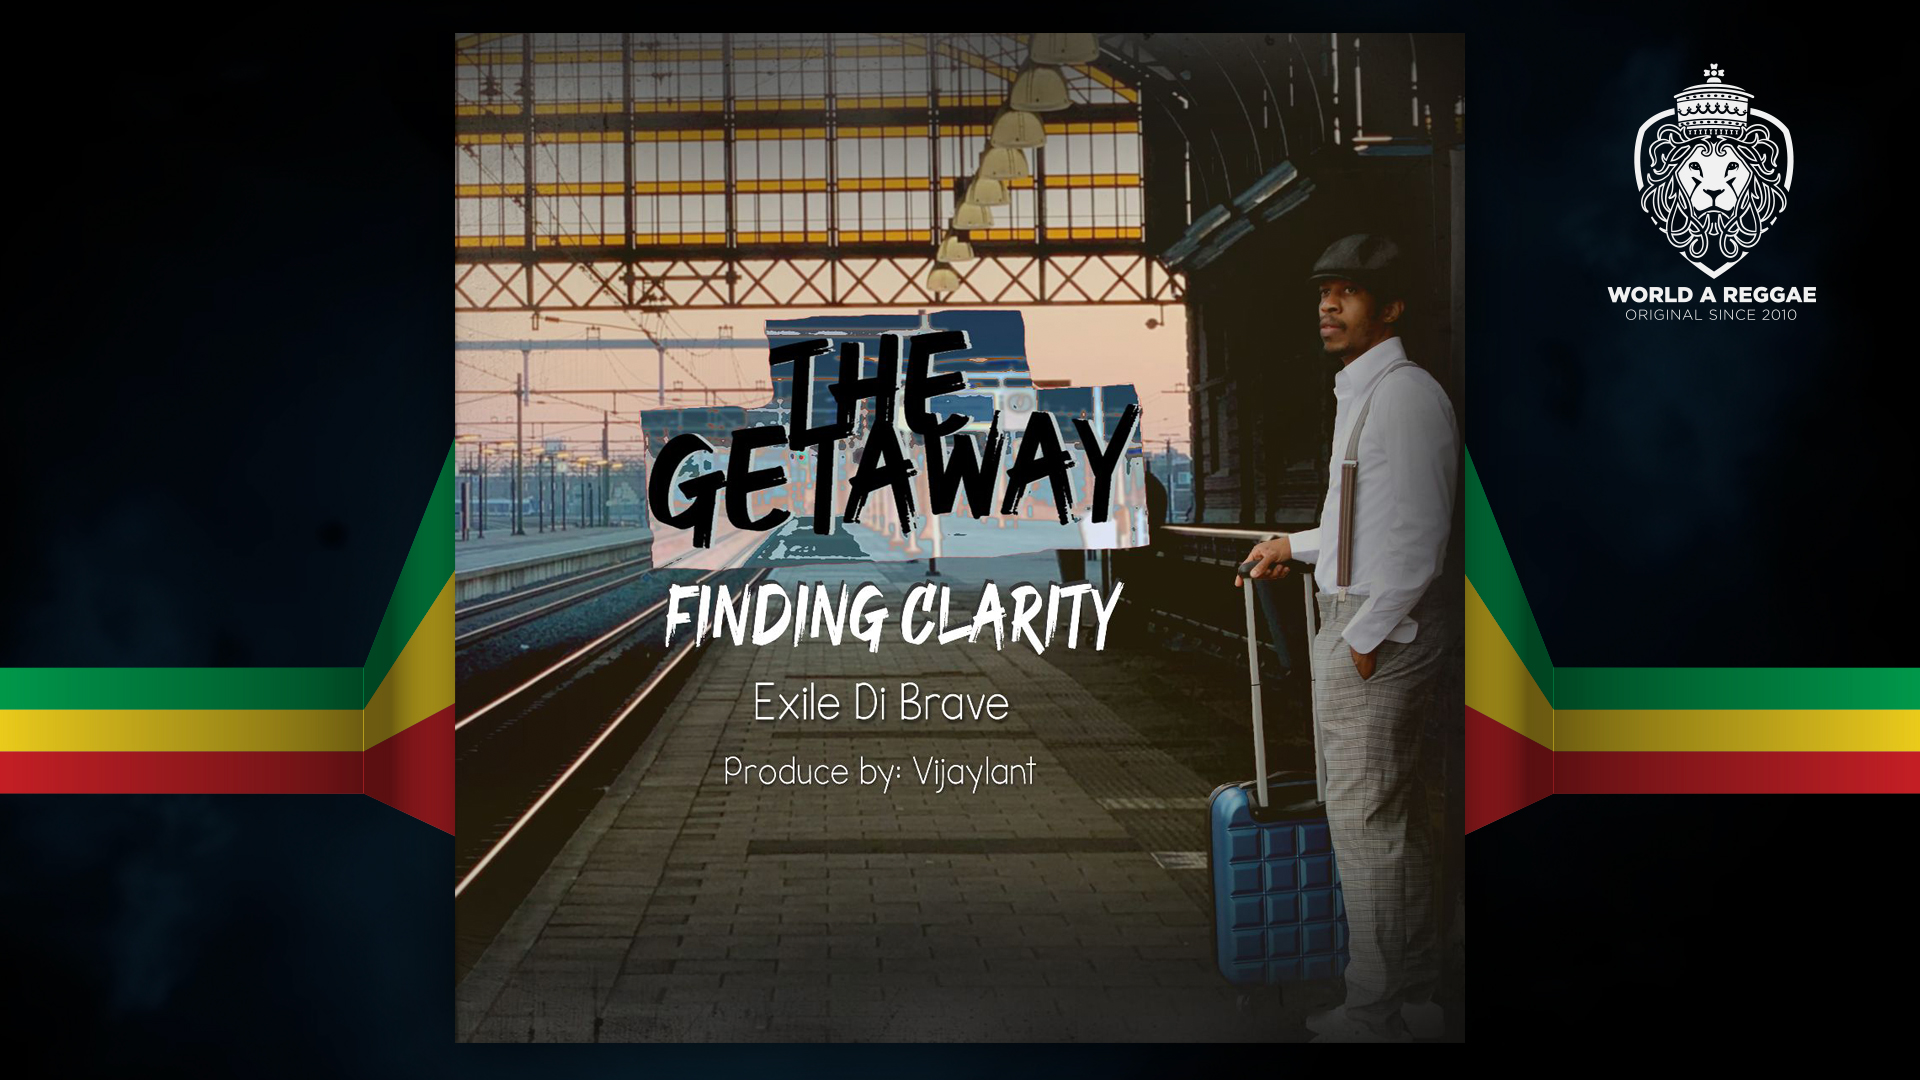 The Getaway Finding Clarity